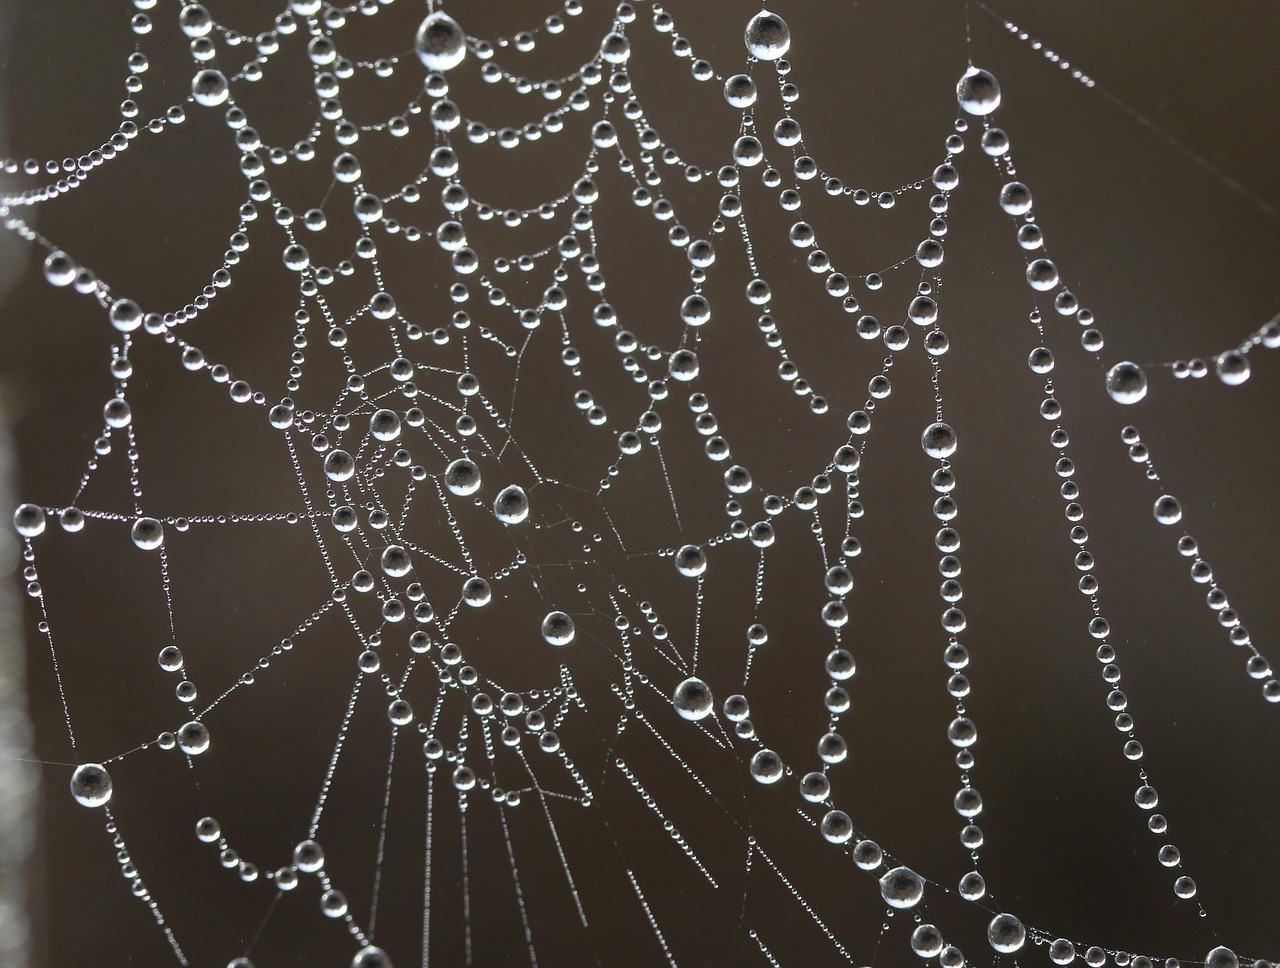 spider web  drops  water free photo